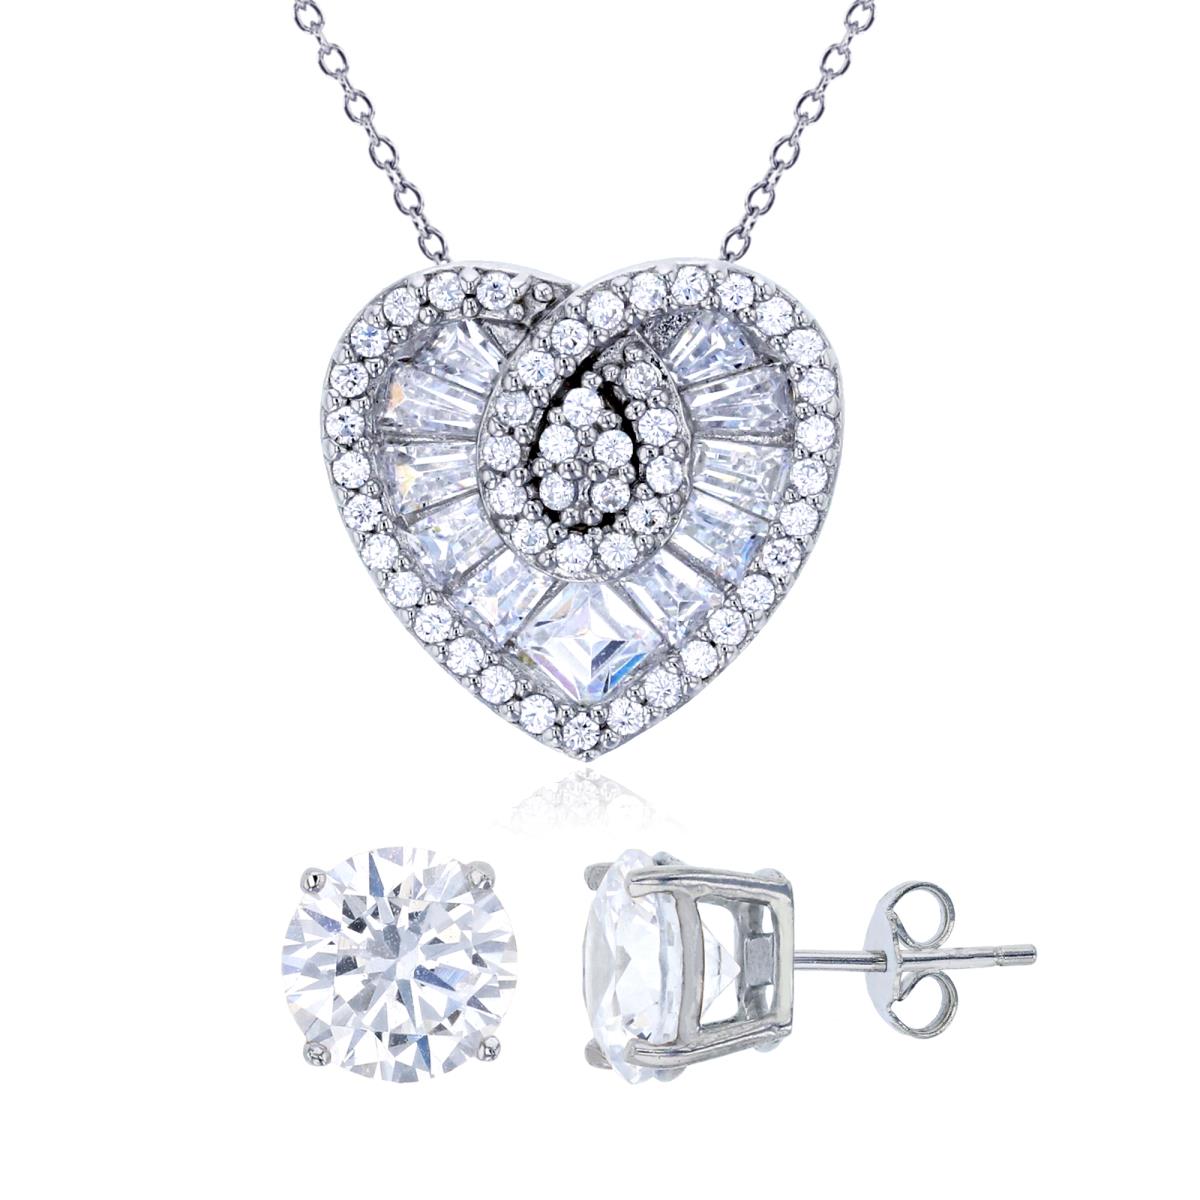 Sterling Silver Rhodium Pave Rd/Bgt CZ Heart 18" Necklace & 8mm Rd Solitaire Stud Earring Set